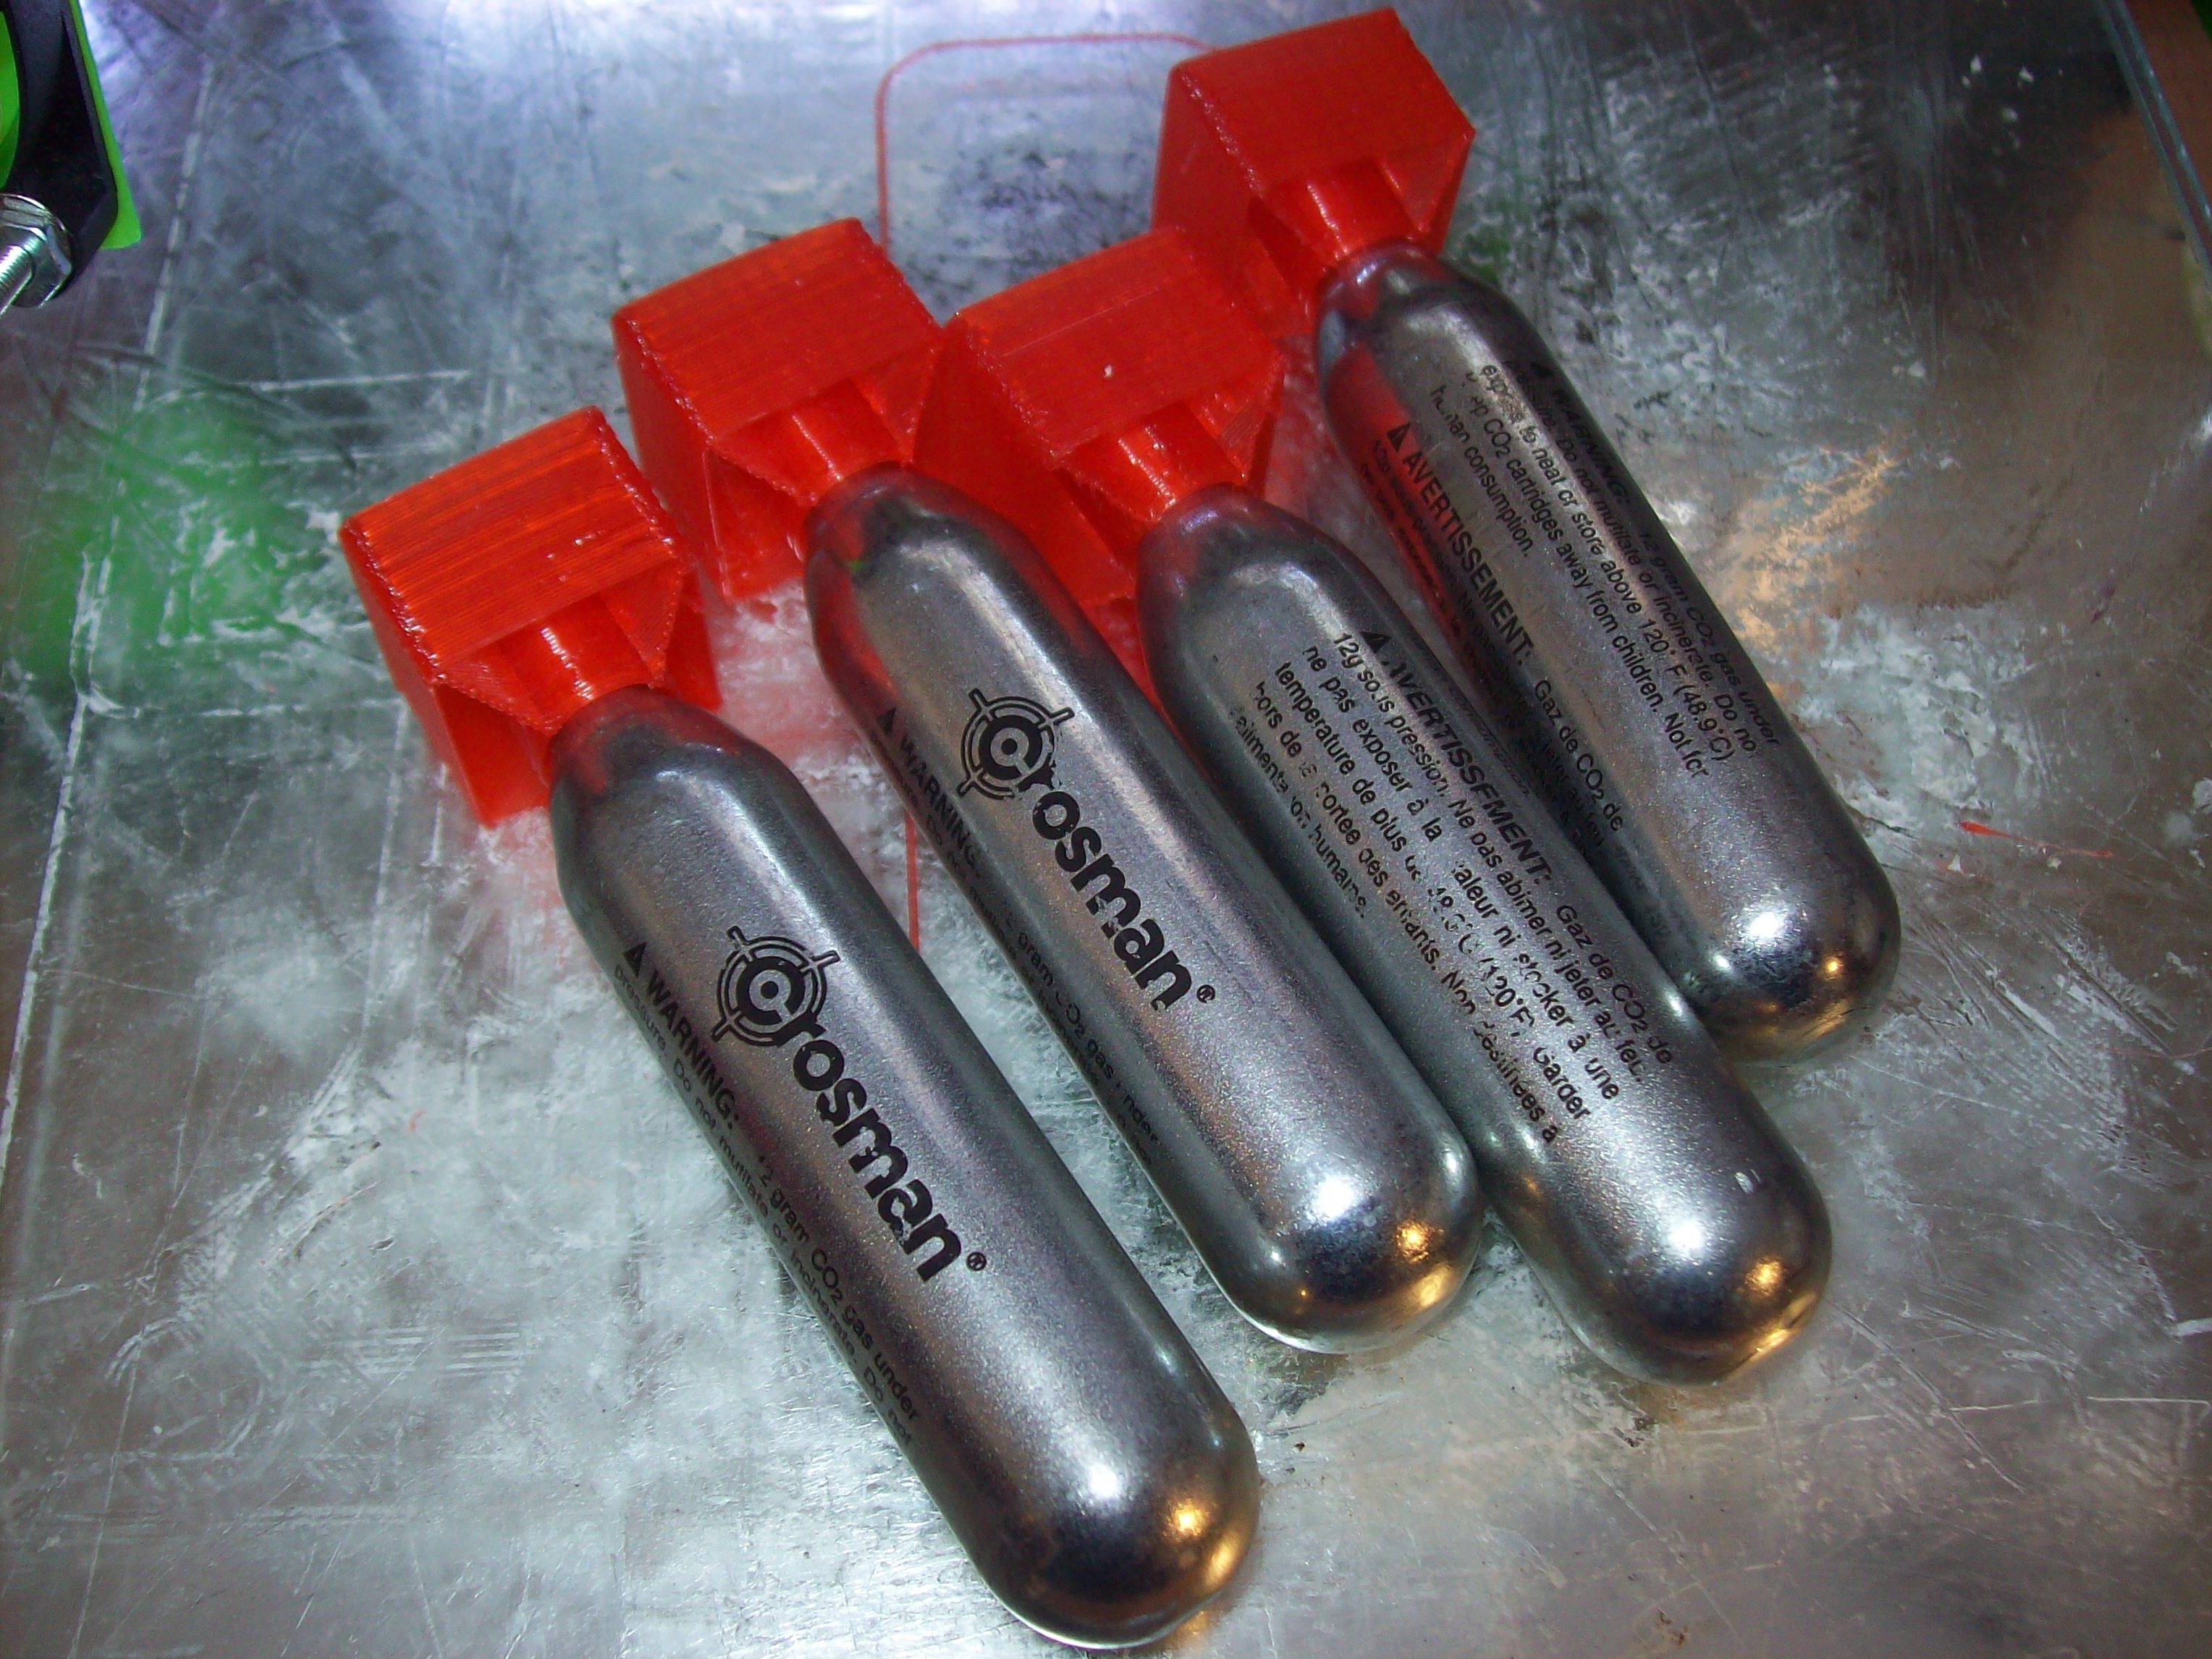 CO2 canister bomb fins